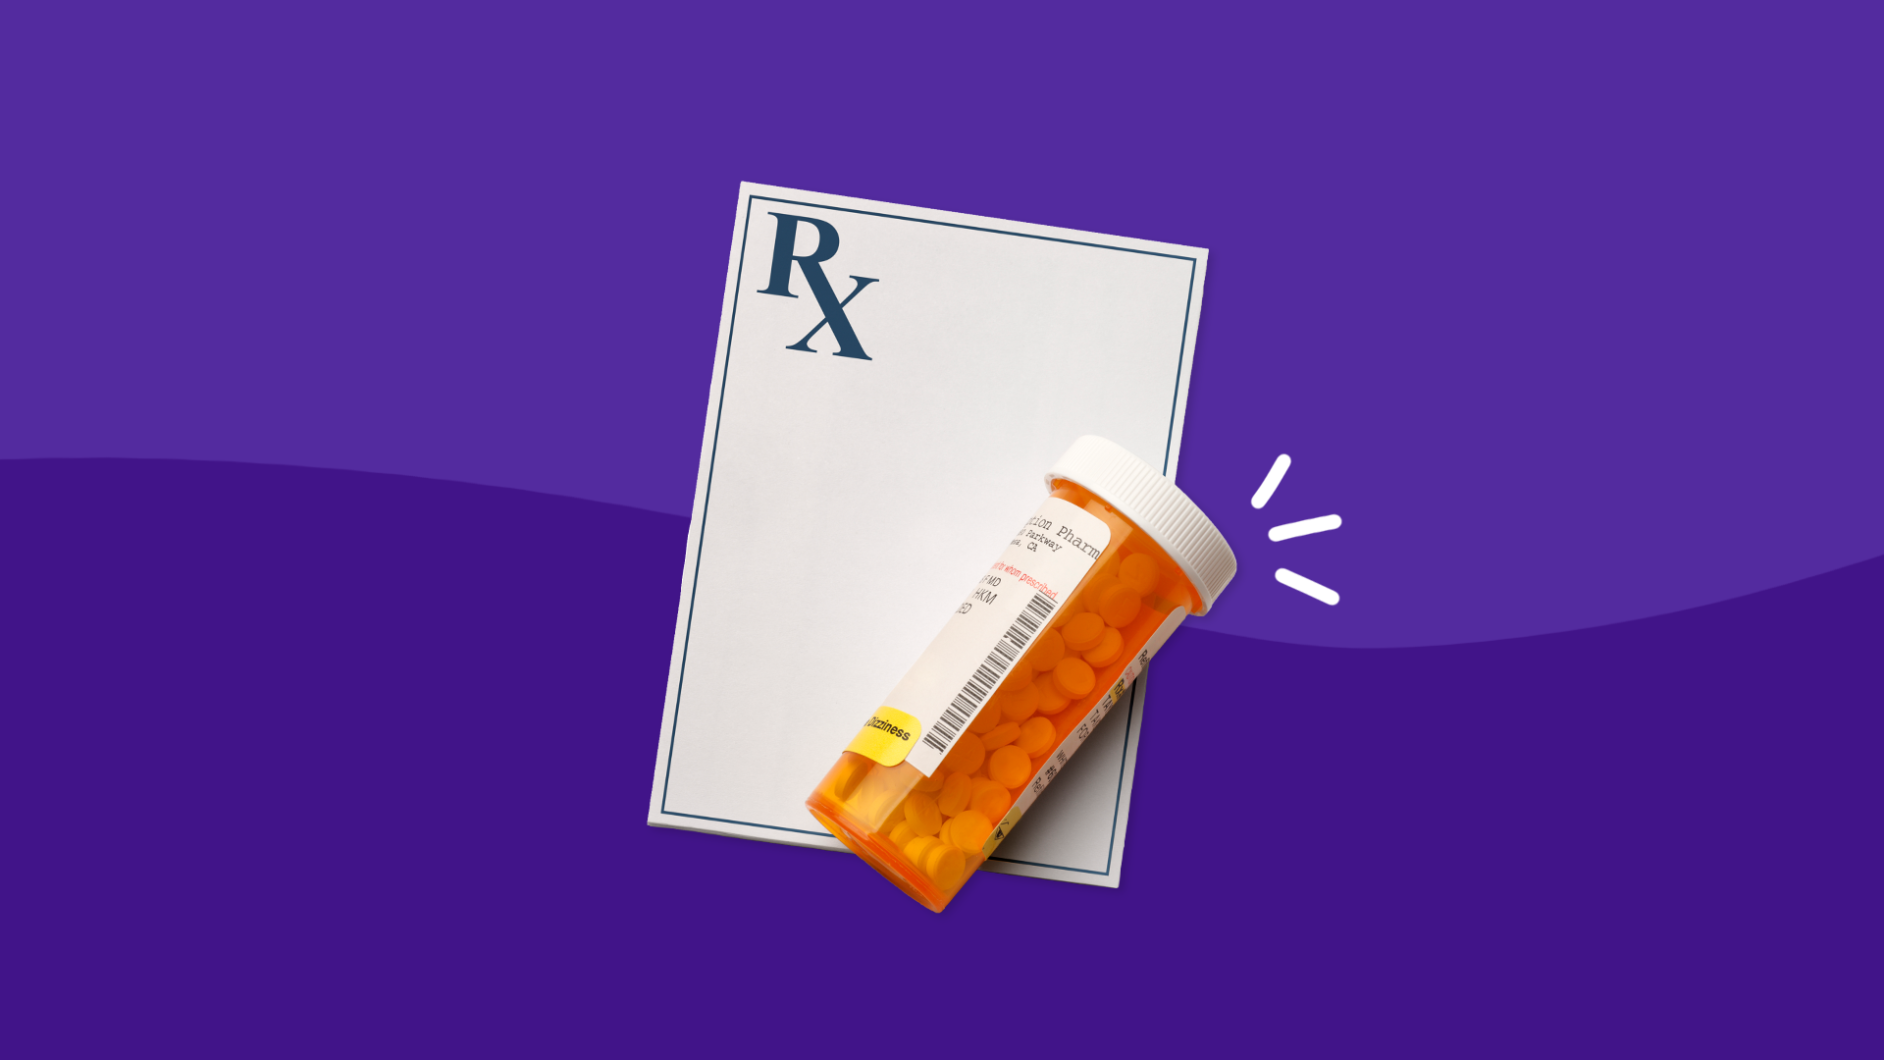 Rx prescprition pad and Rx pill bottle: Generic Xanax